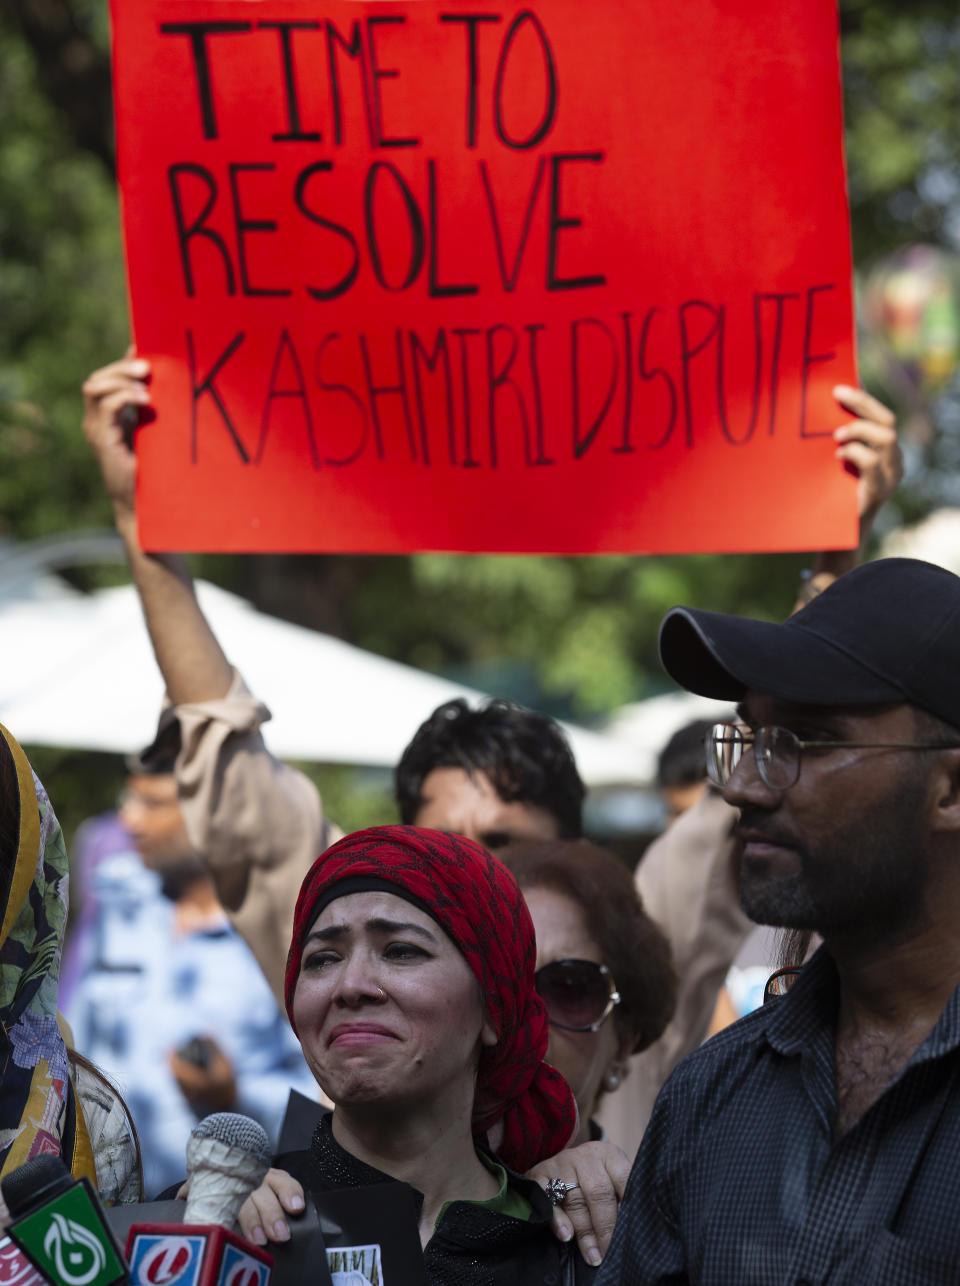 A Pakistani protester in tears expresses solidarity with Indian Kashmiris, in Islamabad, Pakistan, Thursday, Aug. 29, 2019. Kashmir is divided between India and Pakistan since they won independence from British colonialists in 1947. They have fought two wars over its control. (AP Photo/B.K. Bangash)